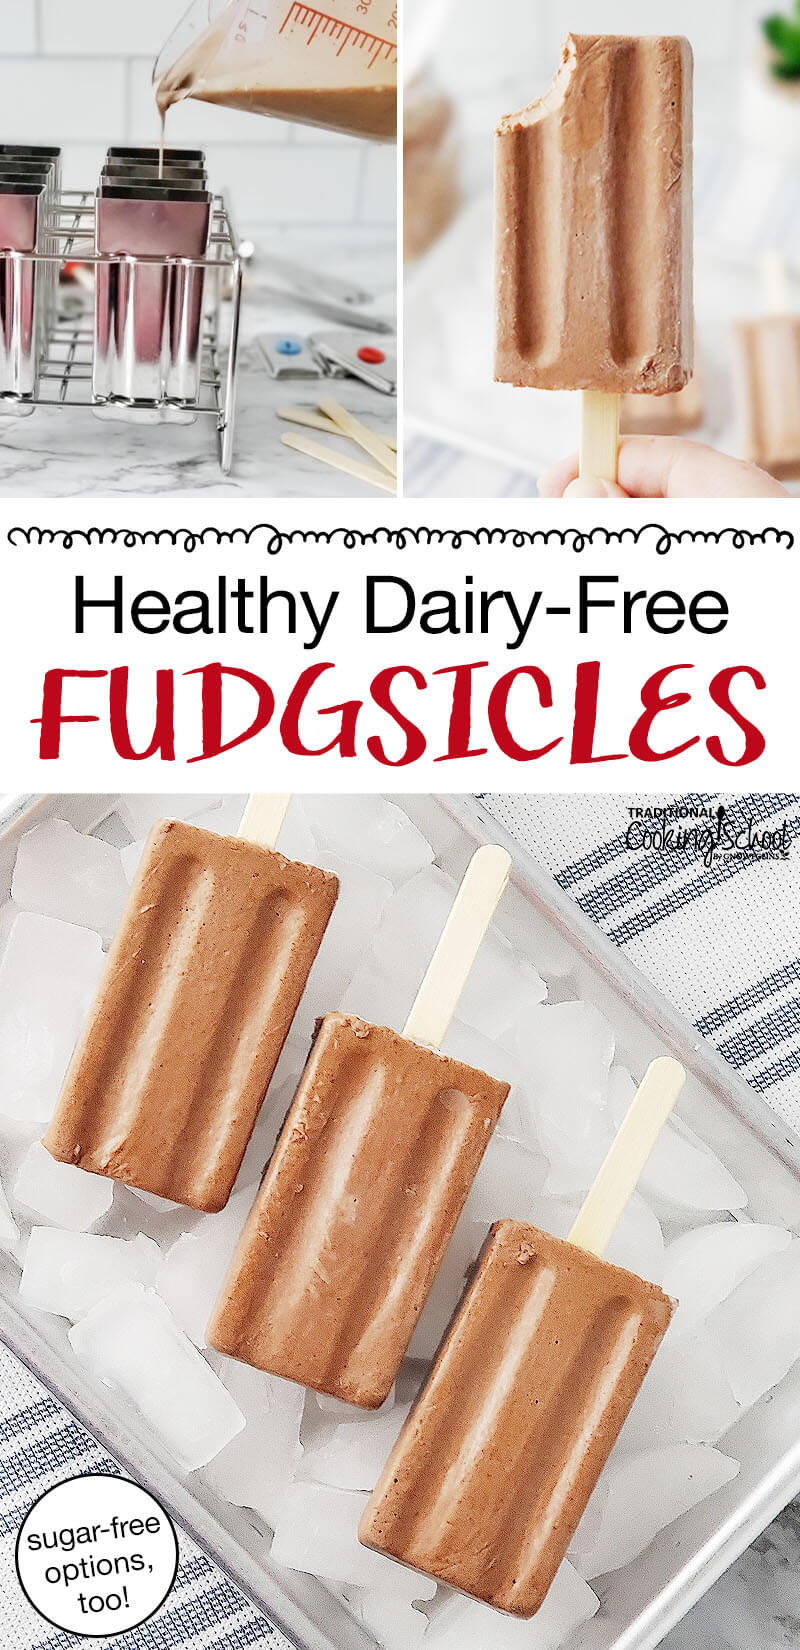 photo collage of pouring chocolate mixture into popsicle molds, a hand holding up a chocolate popsicle with a bite taken out of it, and chocolate popsicles arranged on an tray of ice cubes. Text overlay says: "Healthy Dairy-Free Fudgsicles (sugar-free options, too!)"